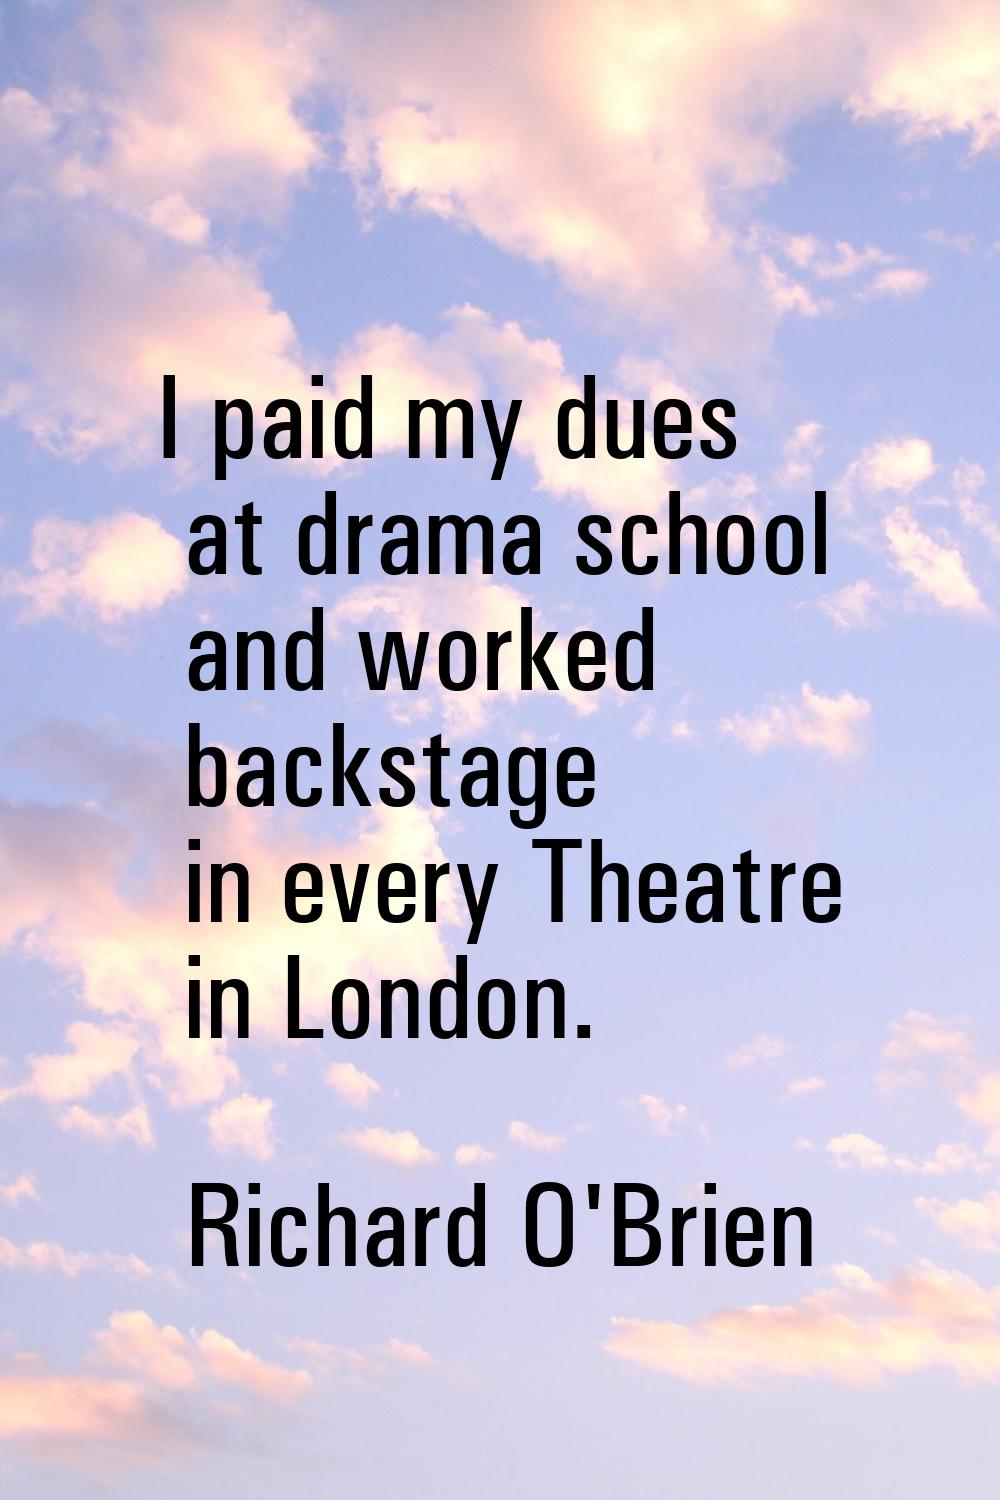 I paid my dues at drama school and worked backstage in every Theatre in London.